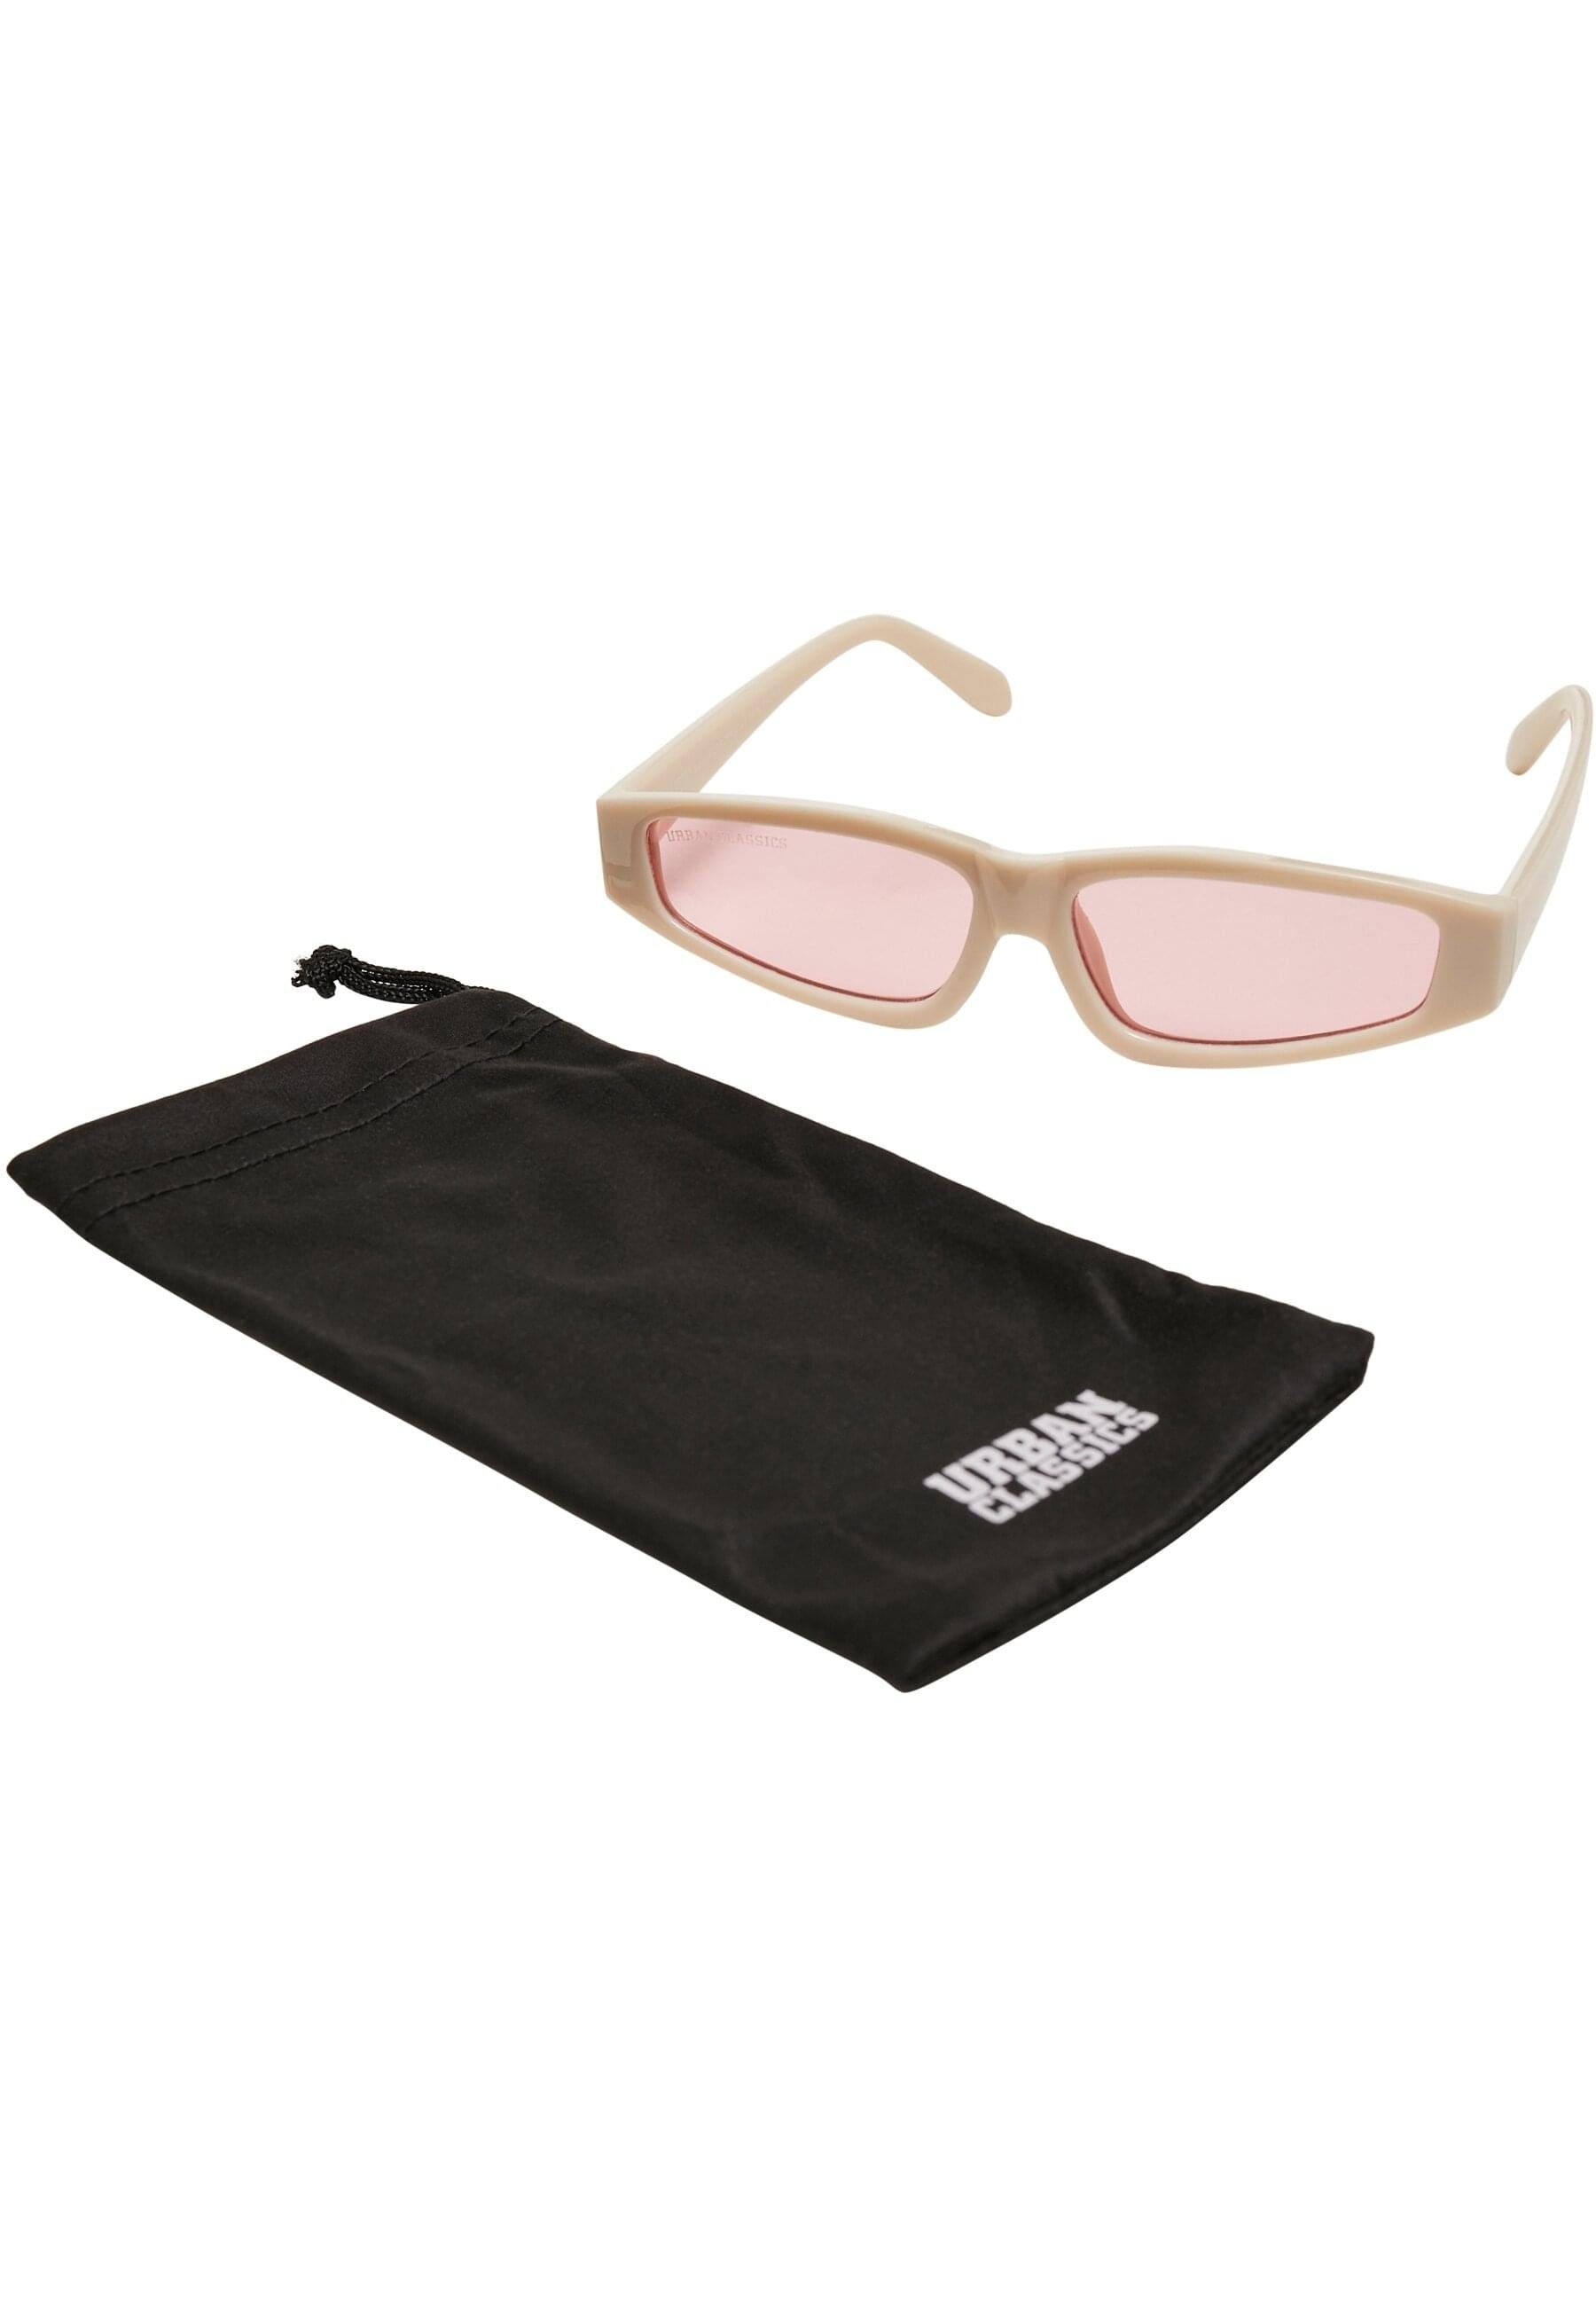 URBAN CLASSICS Sonnenbrille Unisex 2-Pack brown/brown+offwhite/pink Lefkada Sunglasses